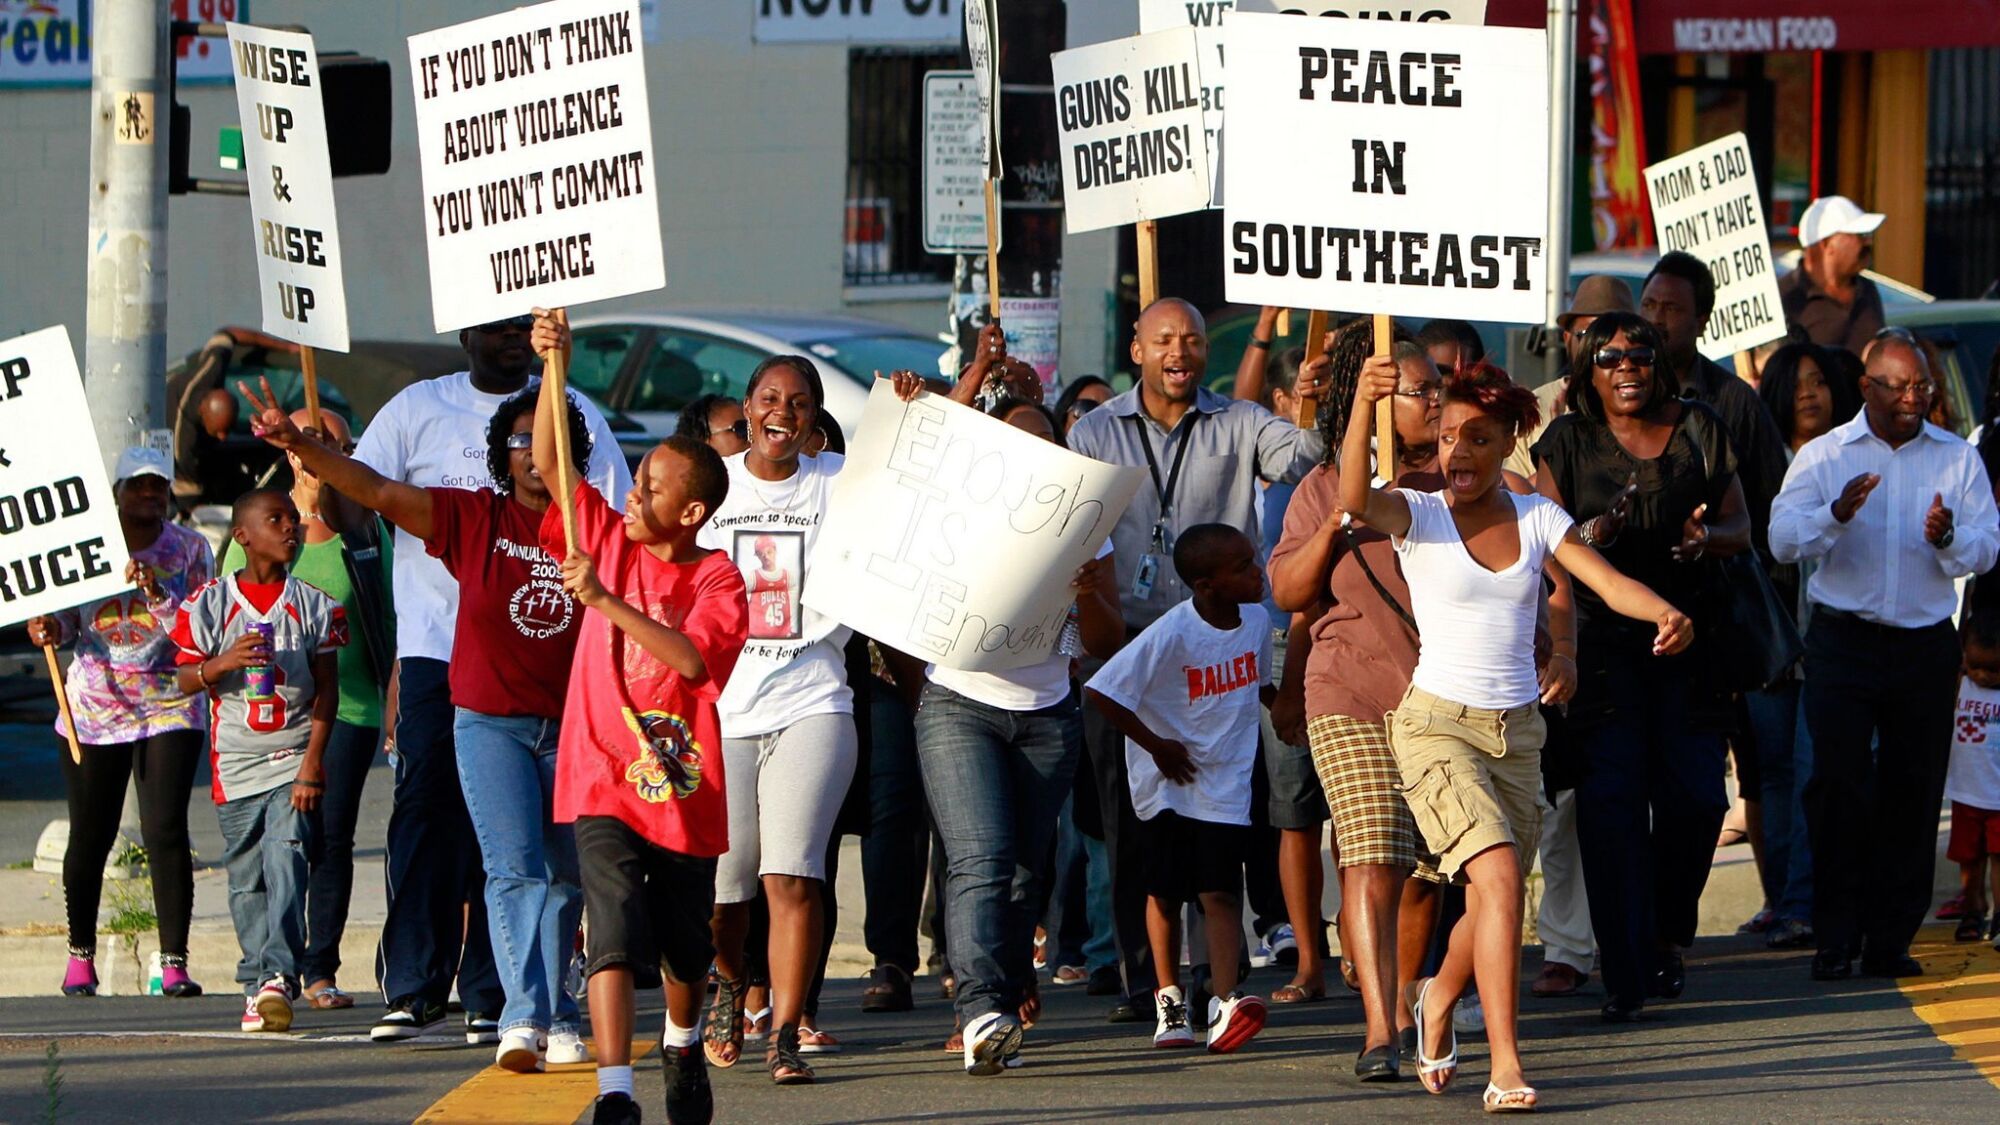 Residents carried held signs and chanted in a rally against violence at the intersection of Euclid and Imperial avenues.